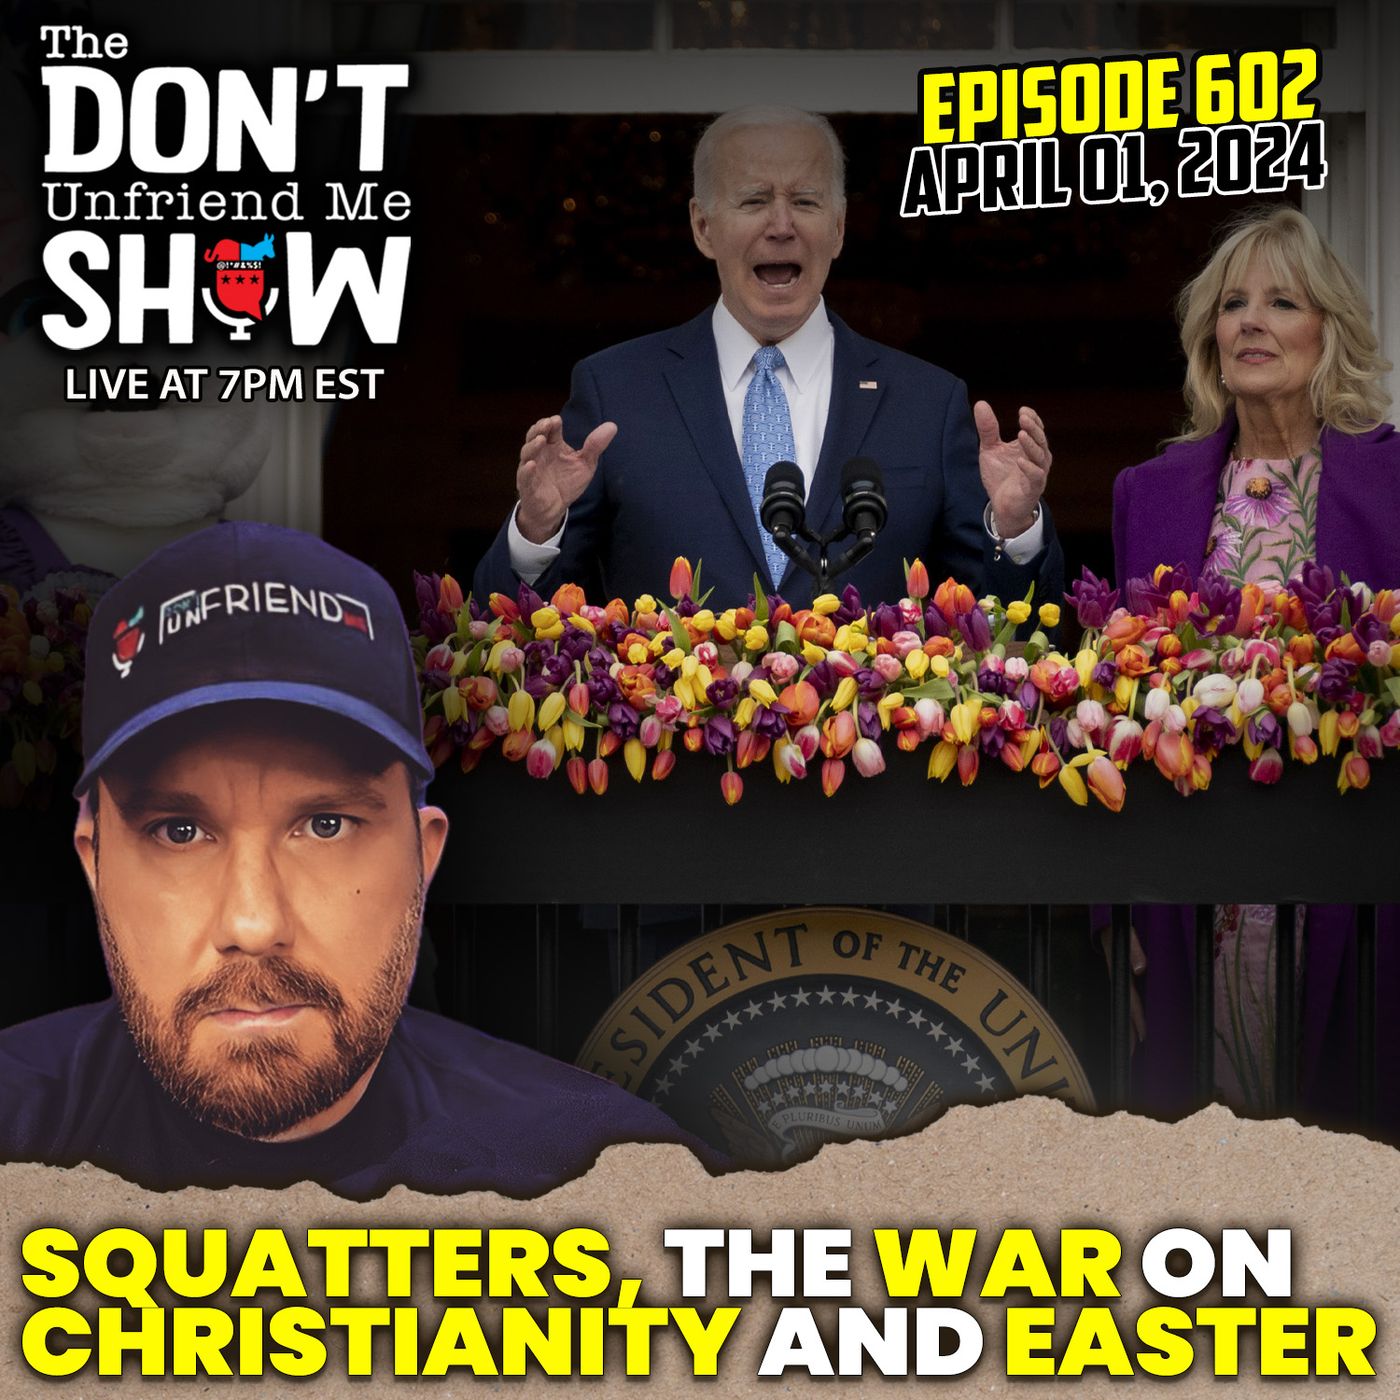 The DUM Show - Episode 602: Squatters, Anti-Christian Sentiment, War On Easter